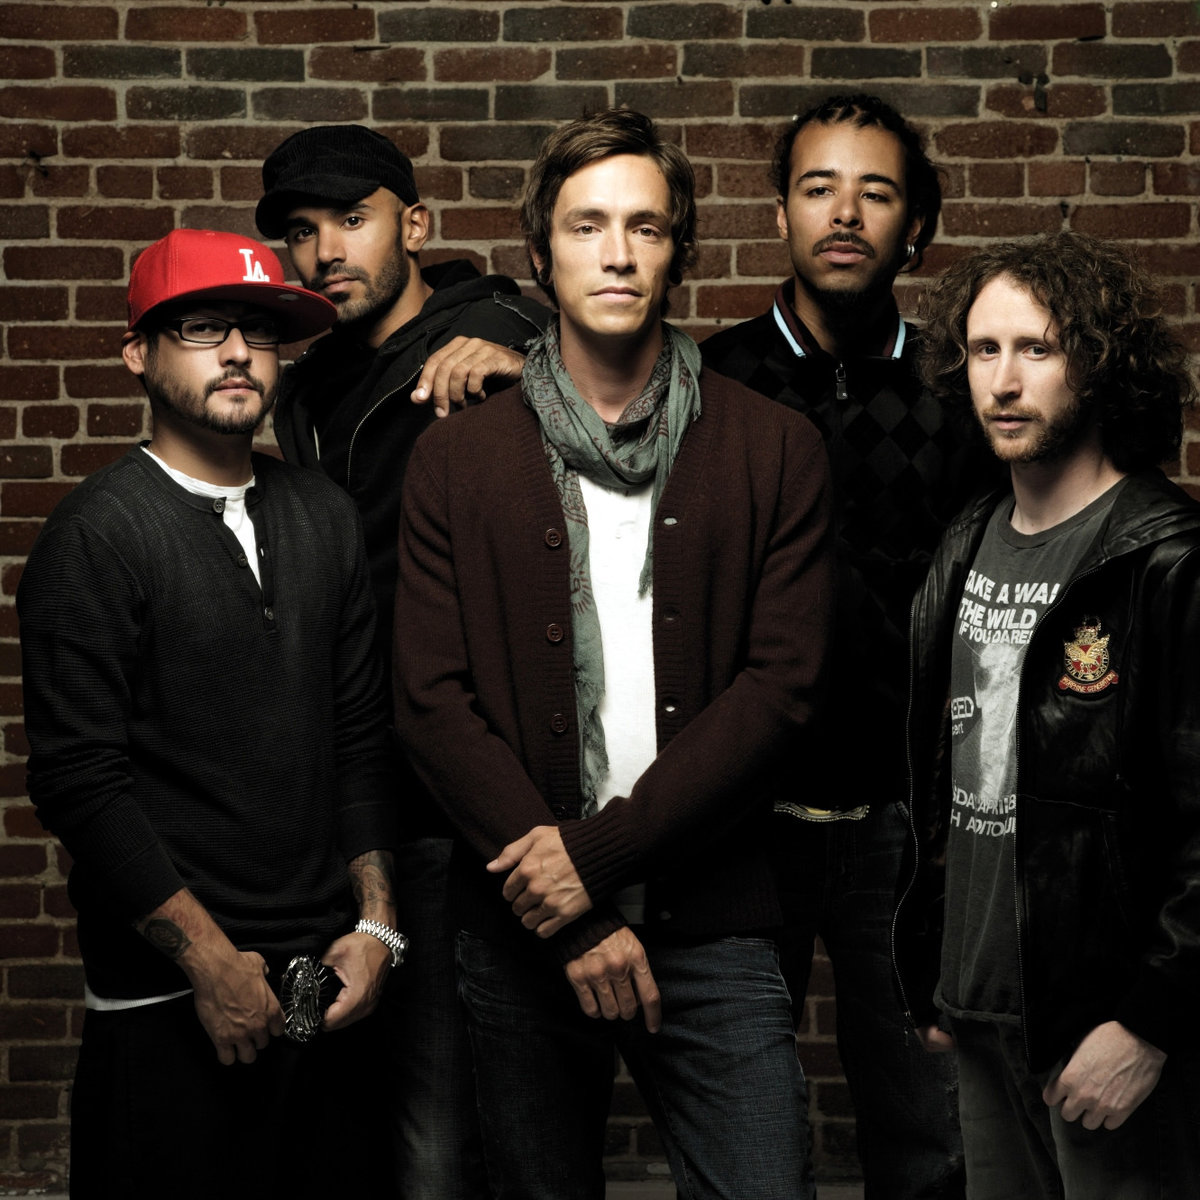 Die Band Incubus.